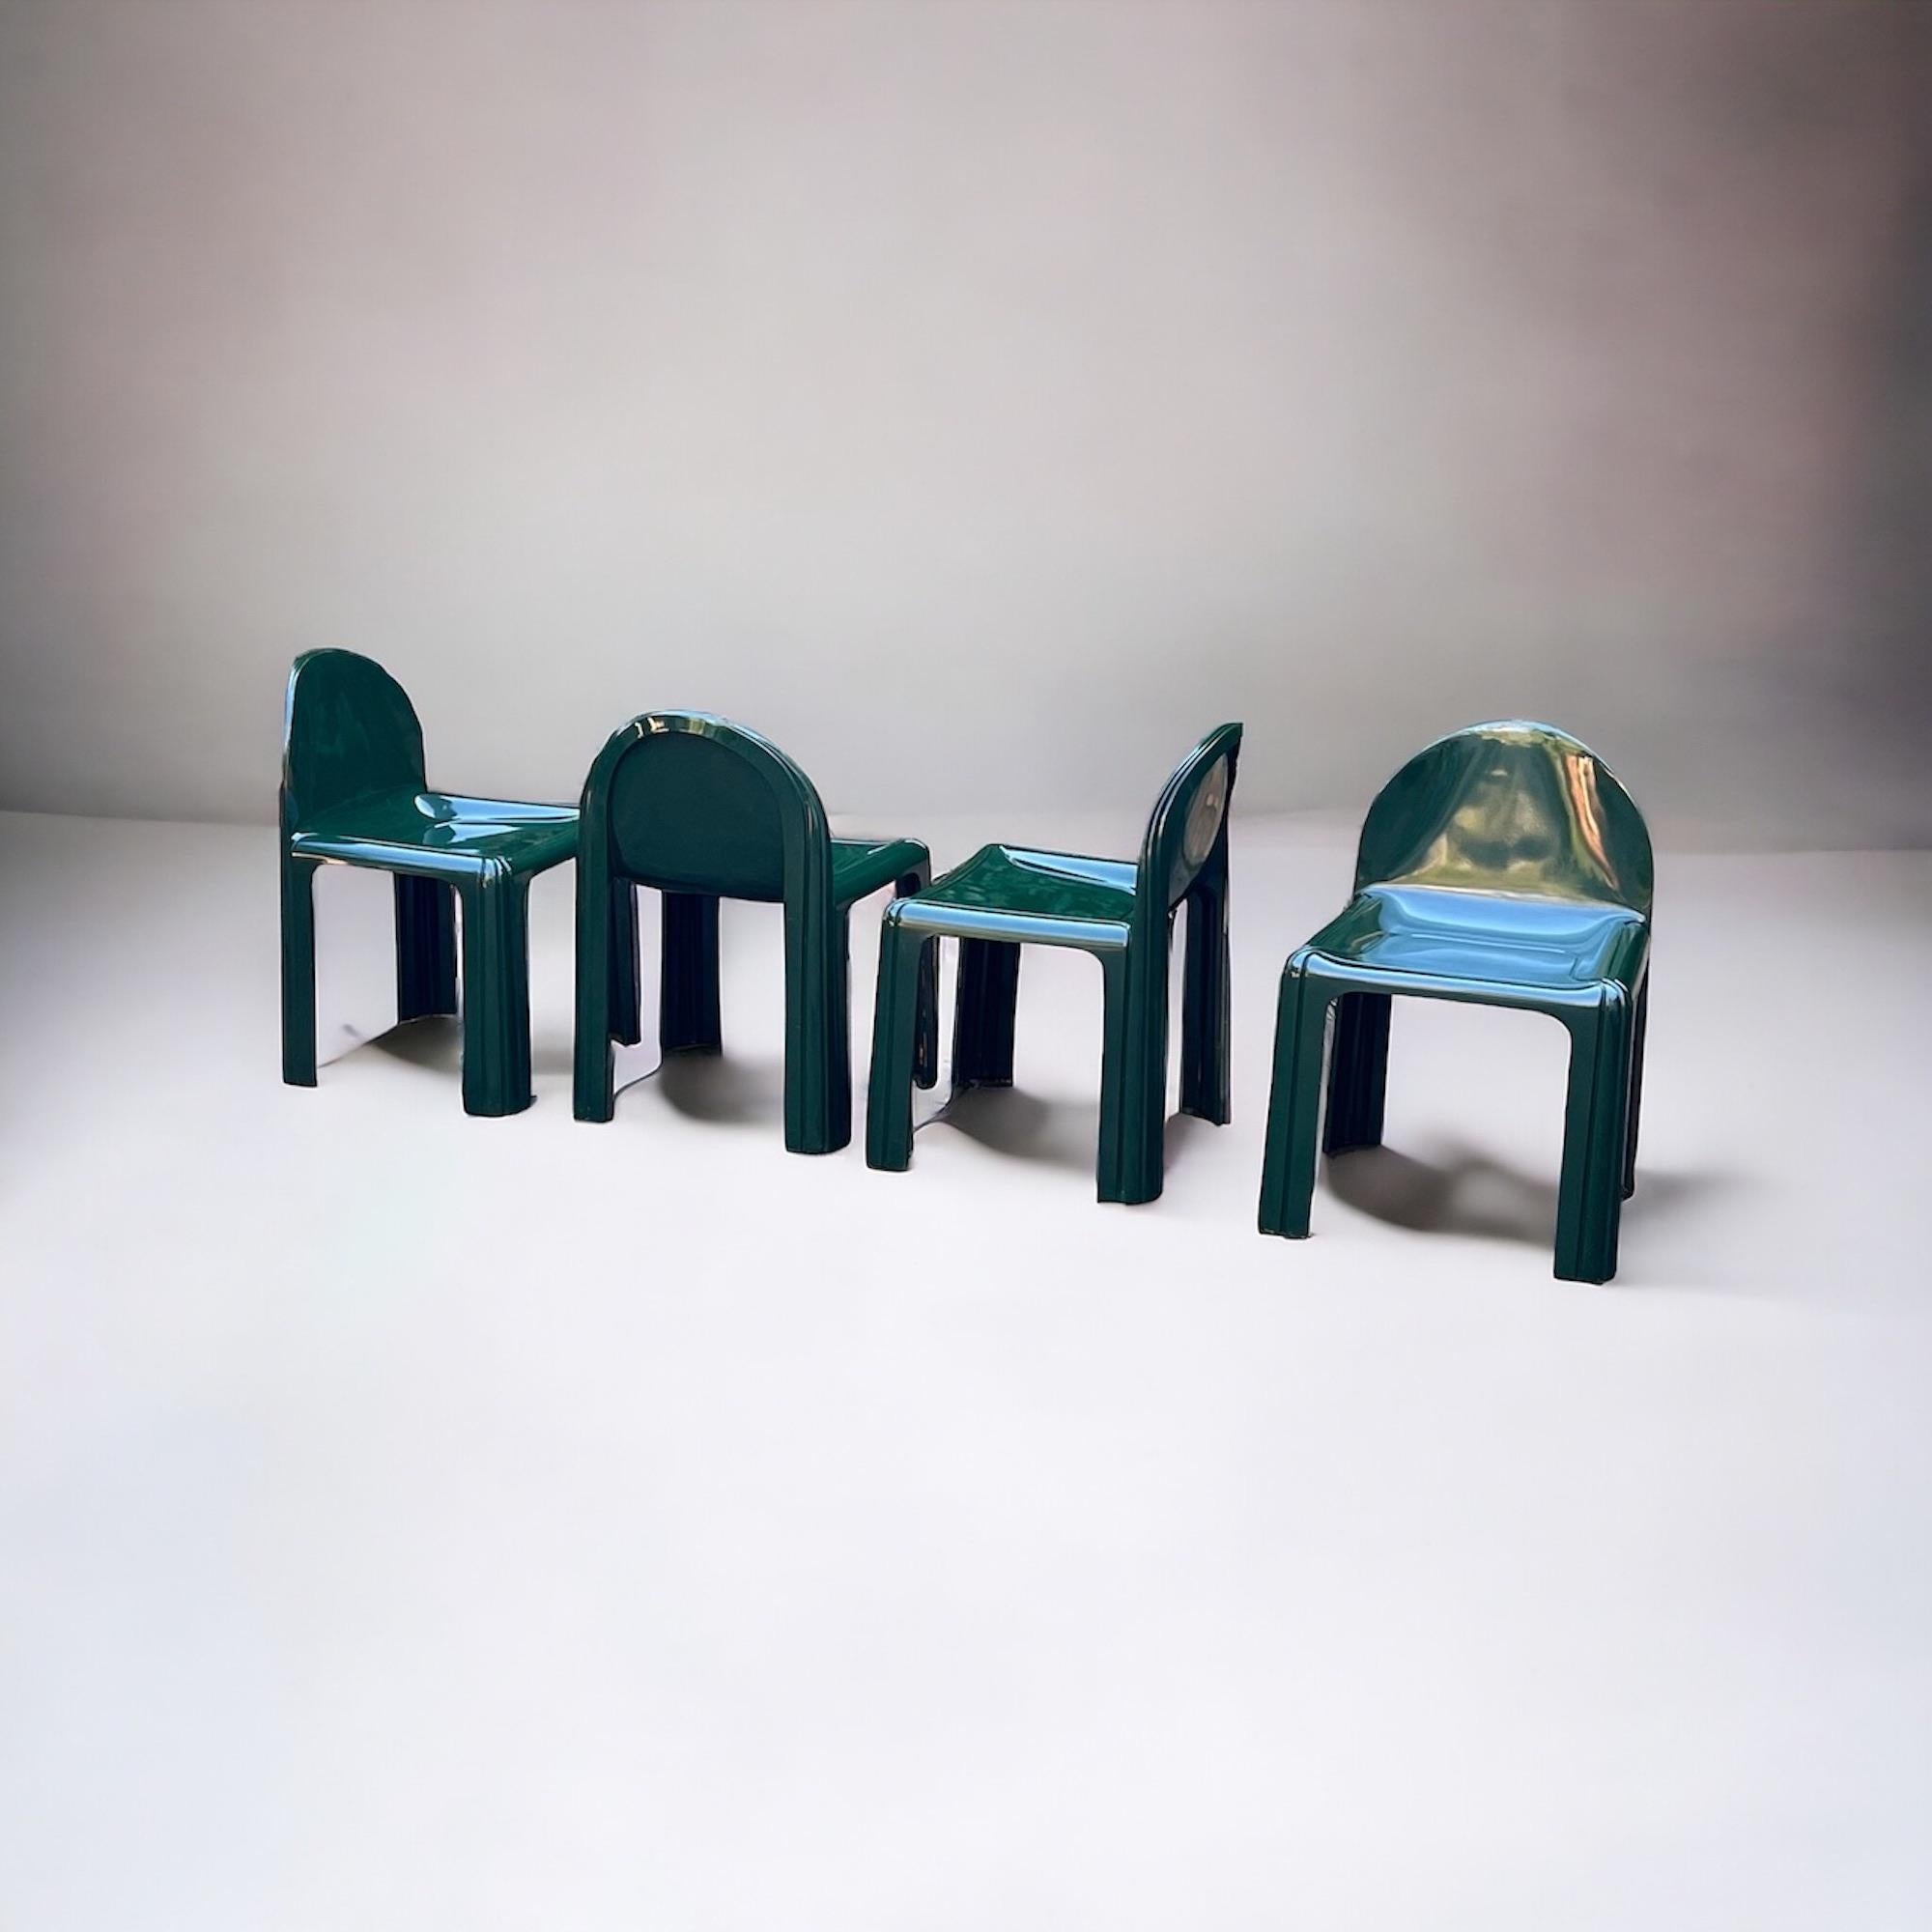 Kartell Model 4854 Chairs by Gae Aulenti, 1960s - Set of 4 - Emerald Green Resin For Sale 1